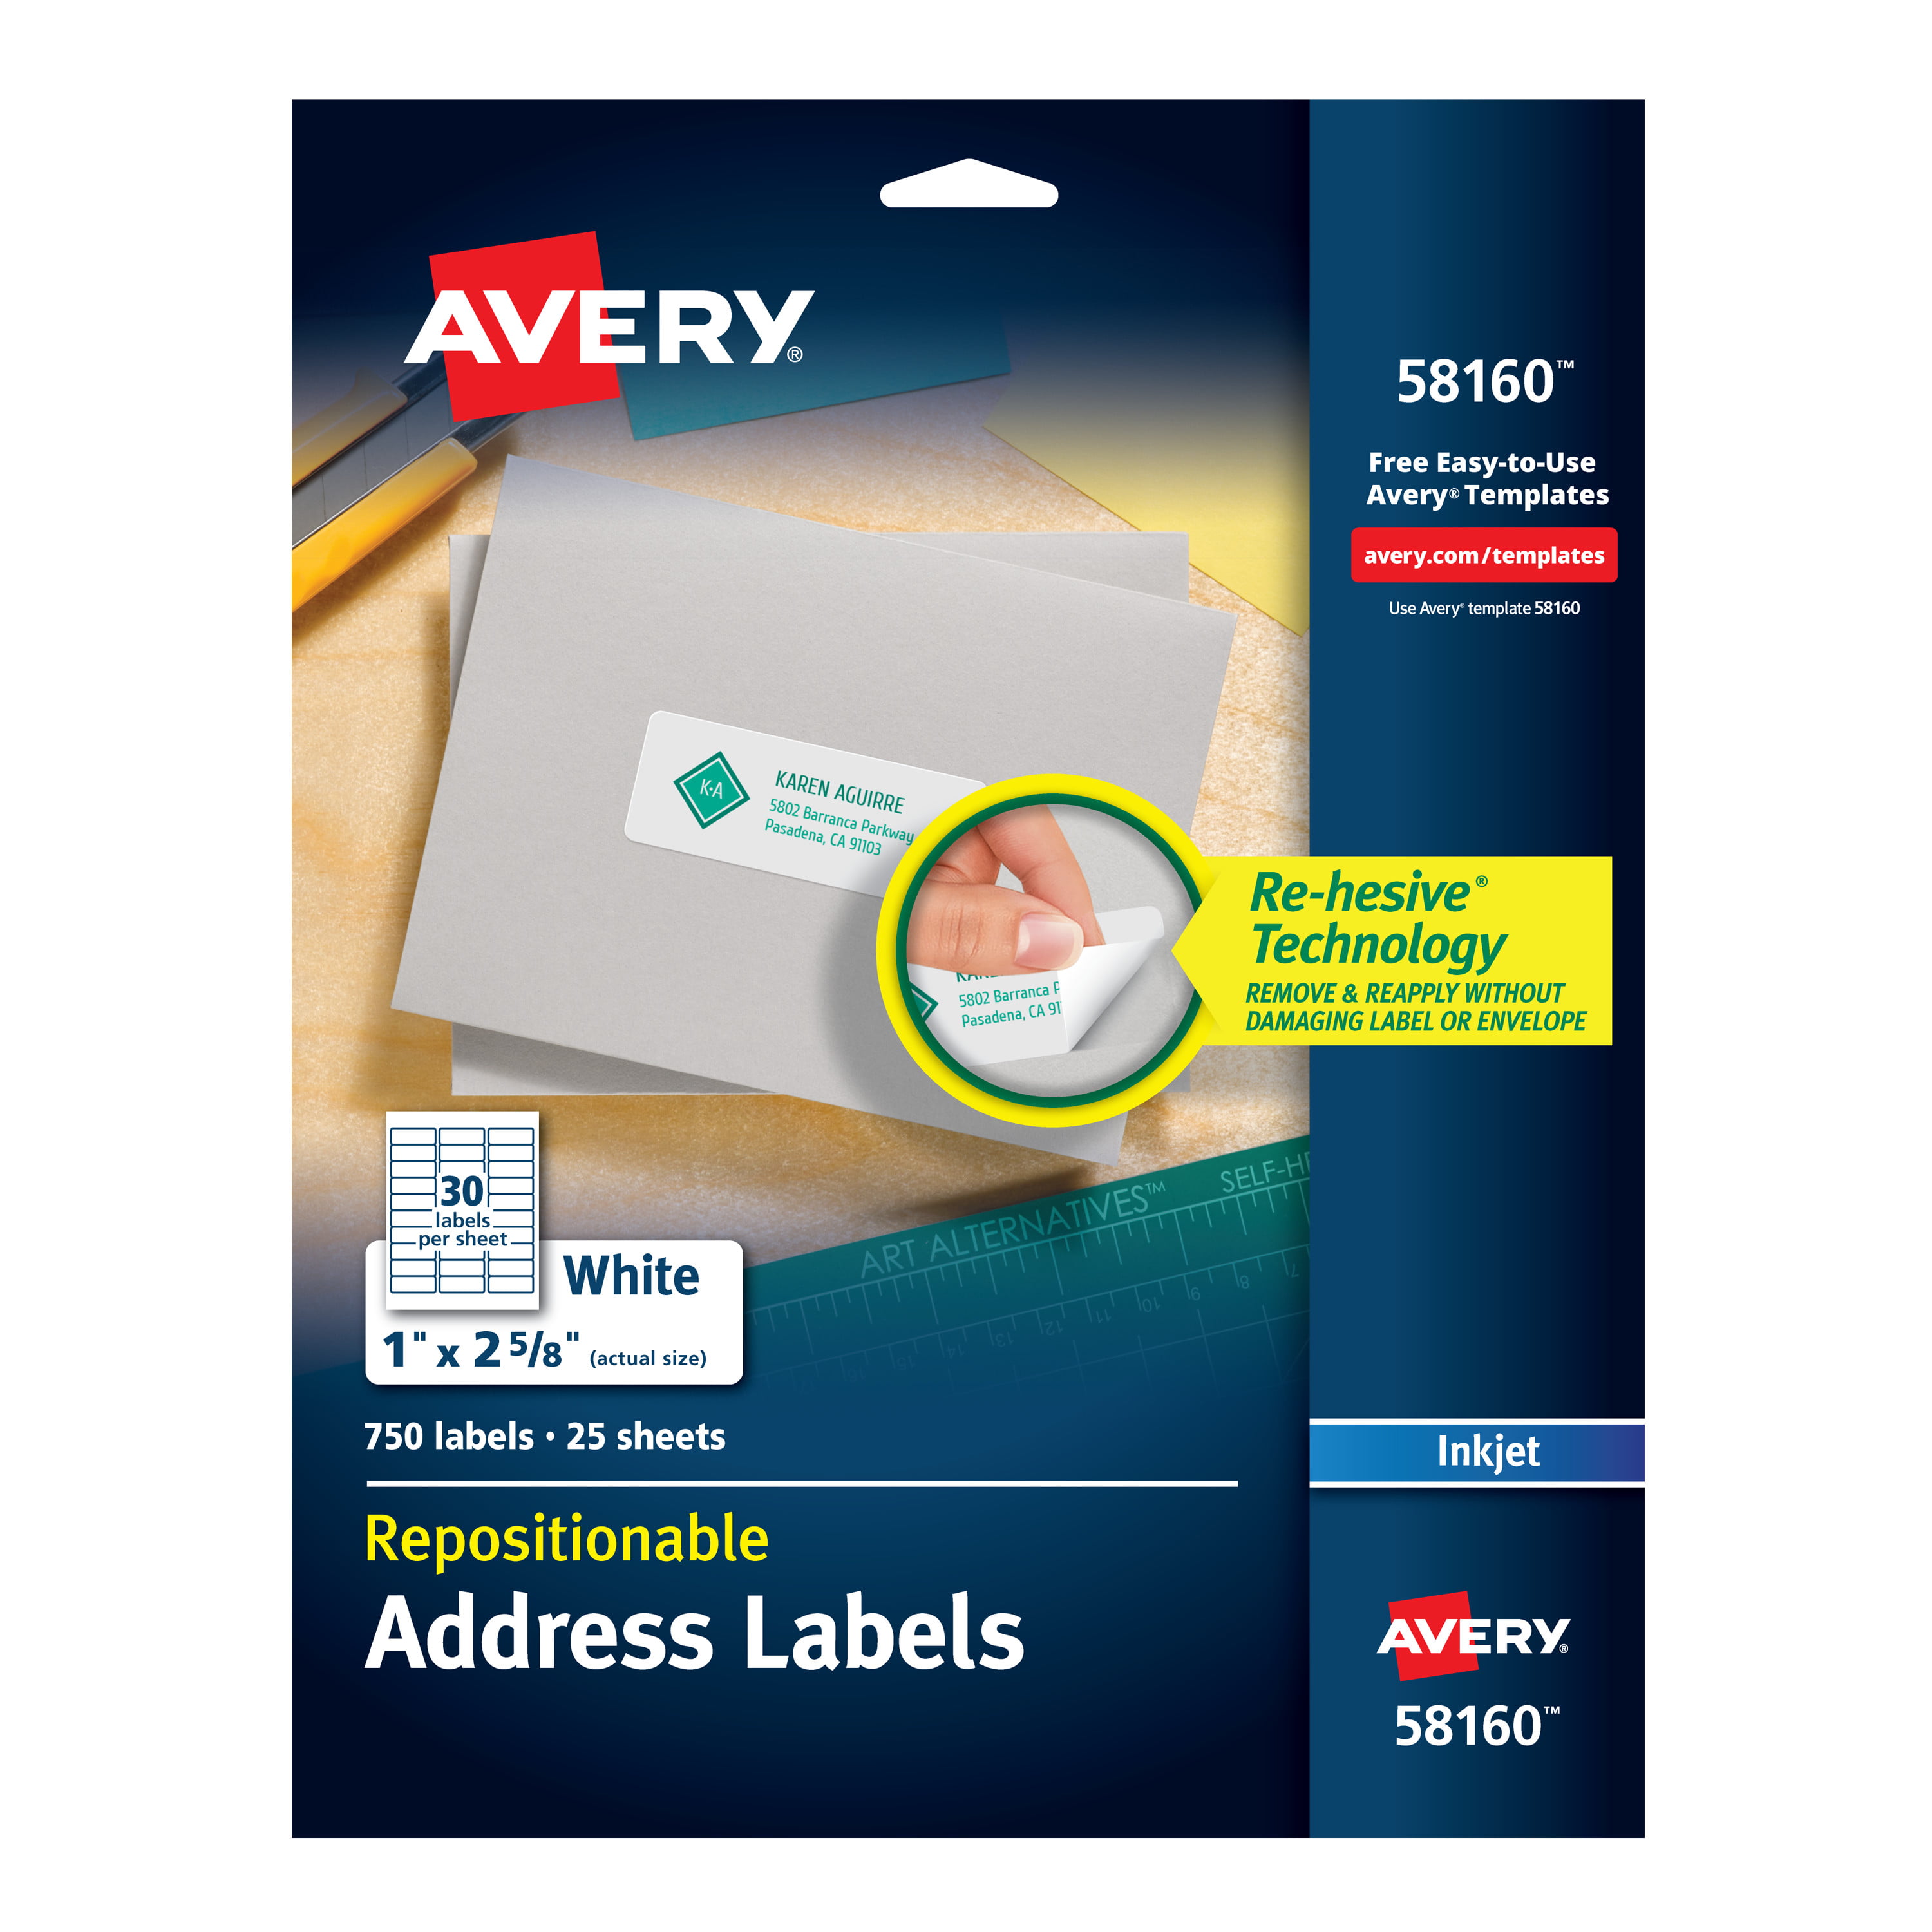 avery-address-labels-with-sure-feed-for-inkjet-printers-1-x-2-5-8